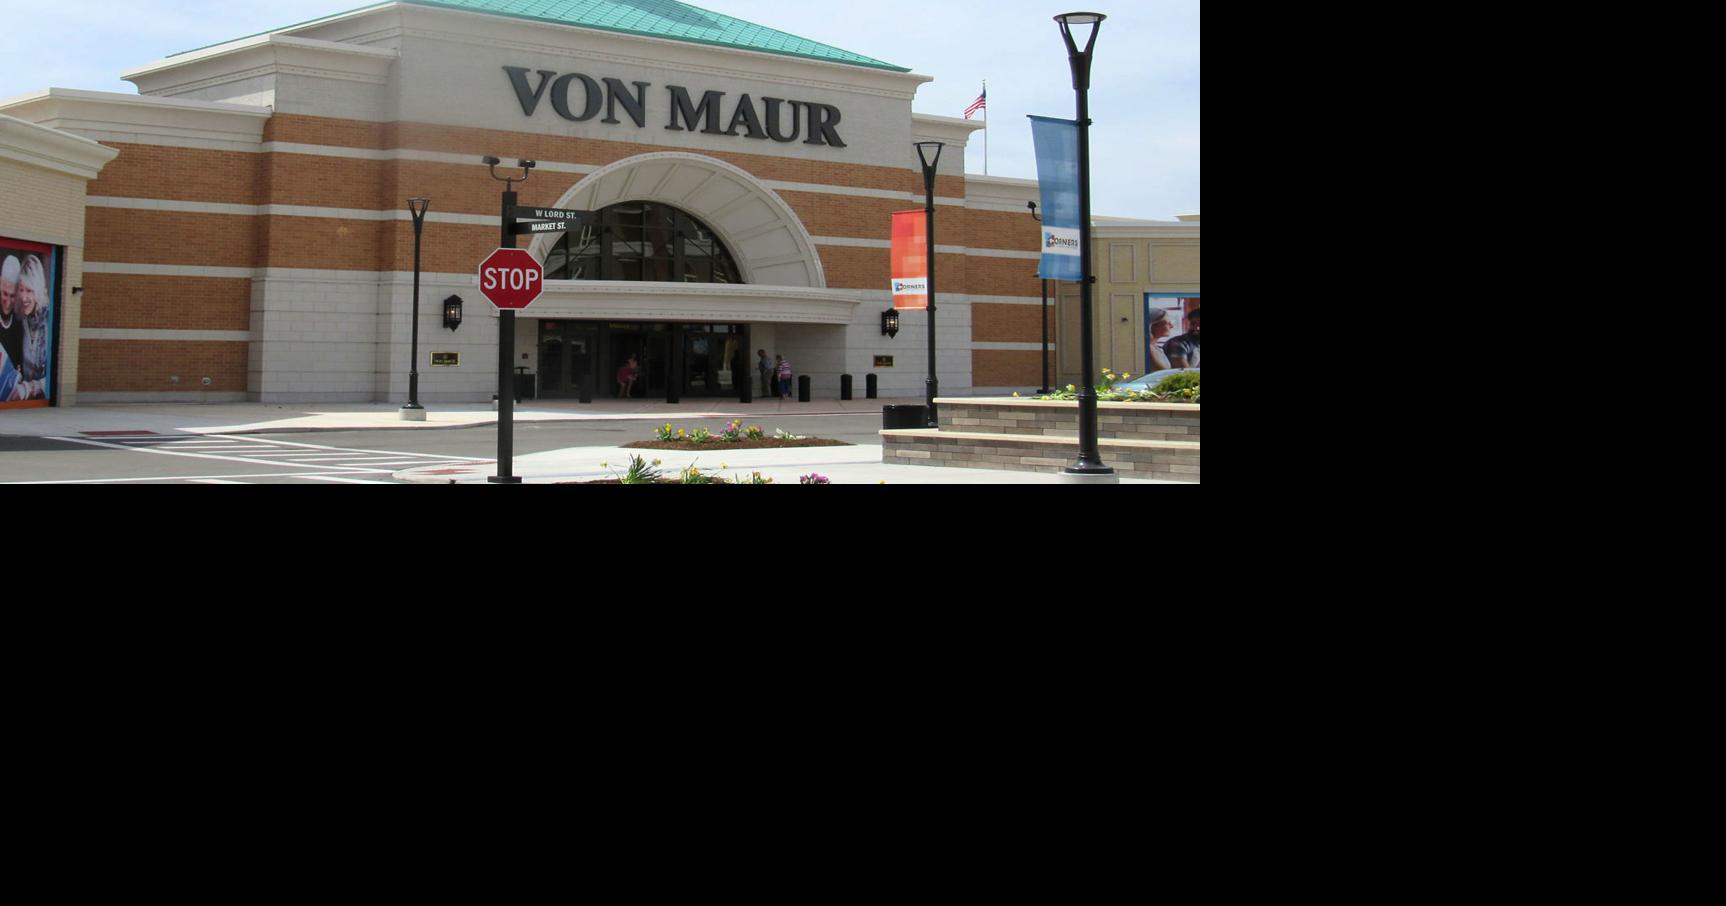 Major void to be filled at West Towne Mall with Von Maur